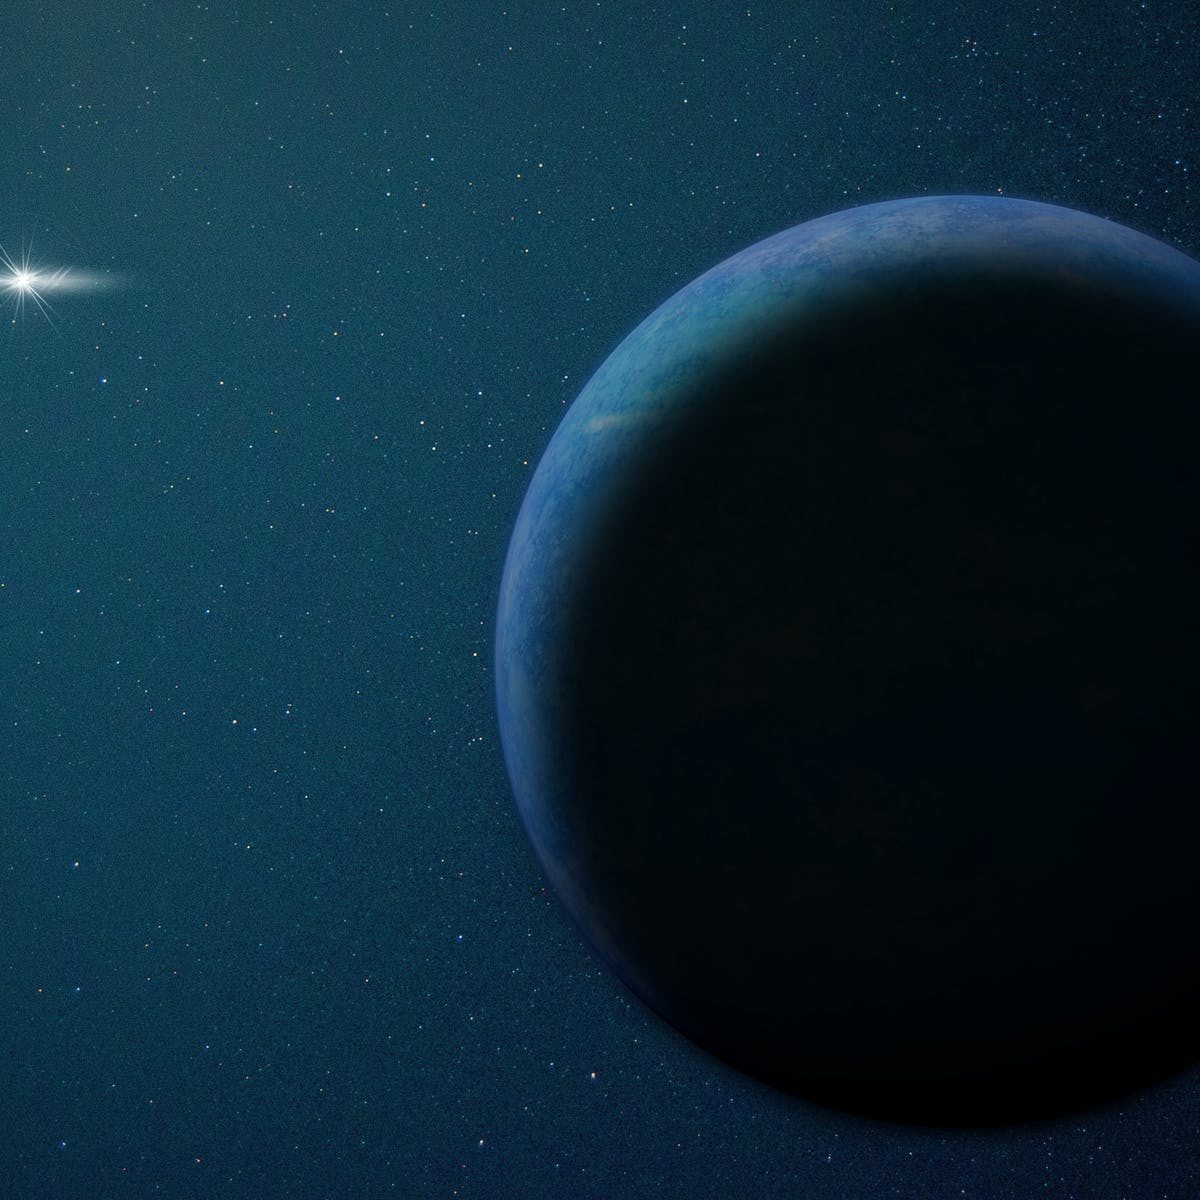 An artist’s concept of a hypothetical planet with a distant sun